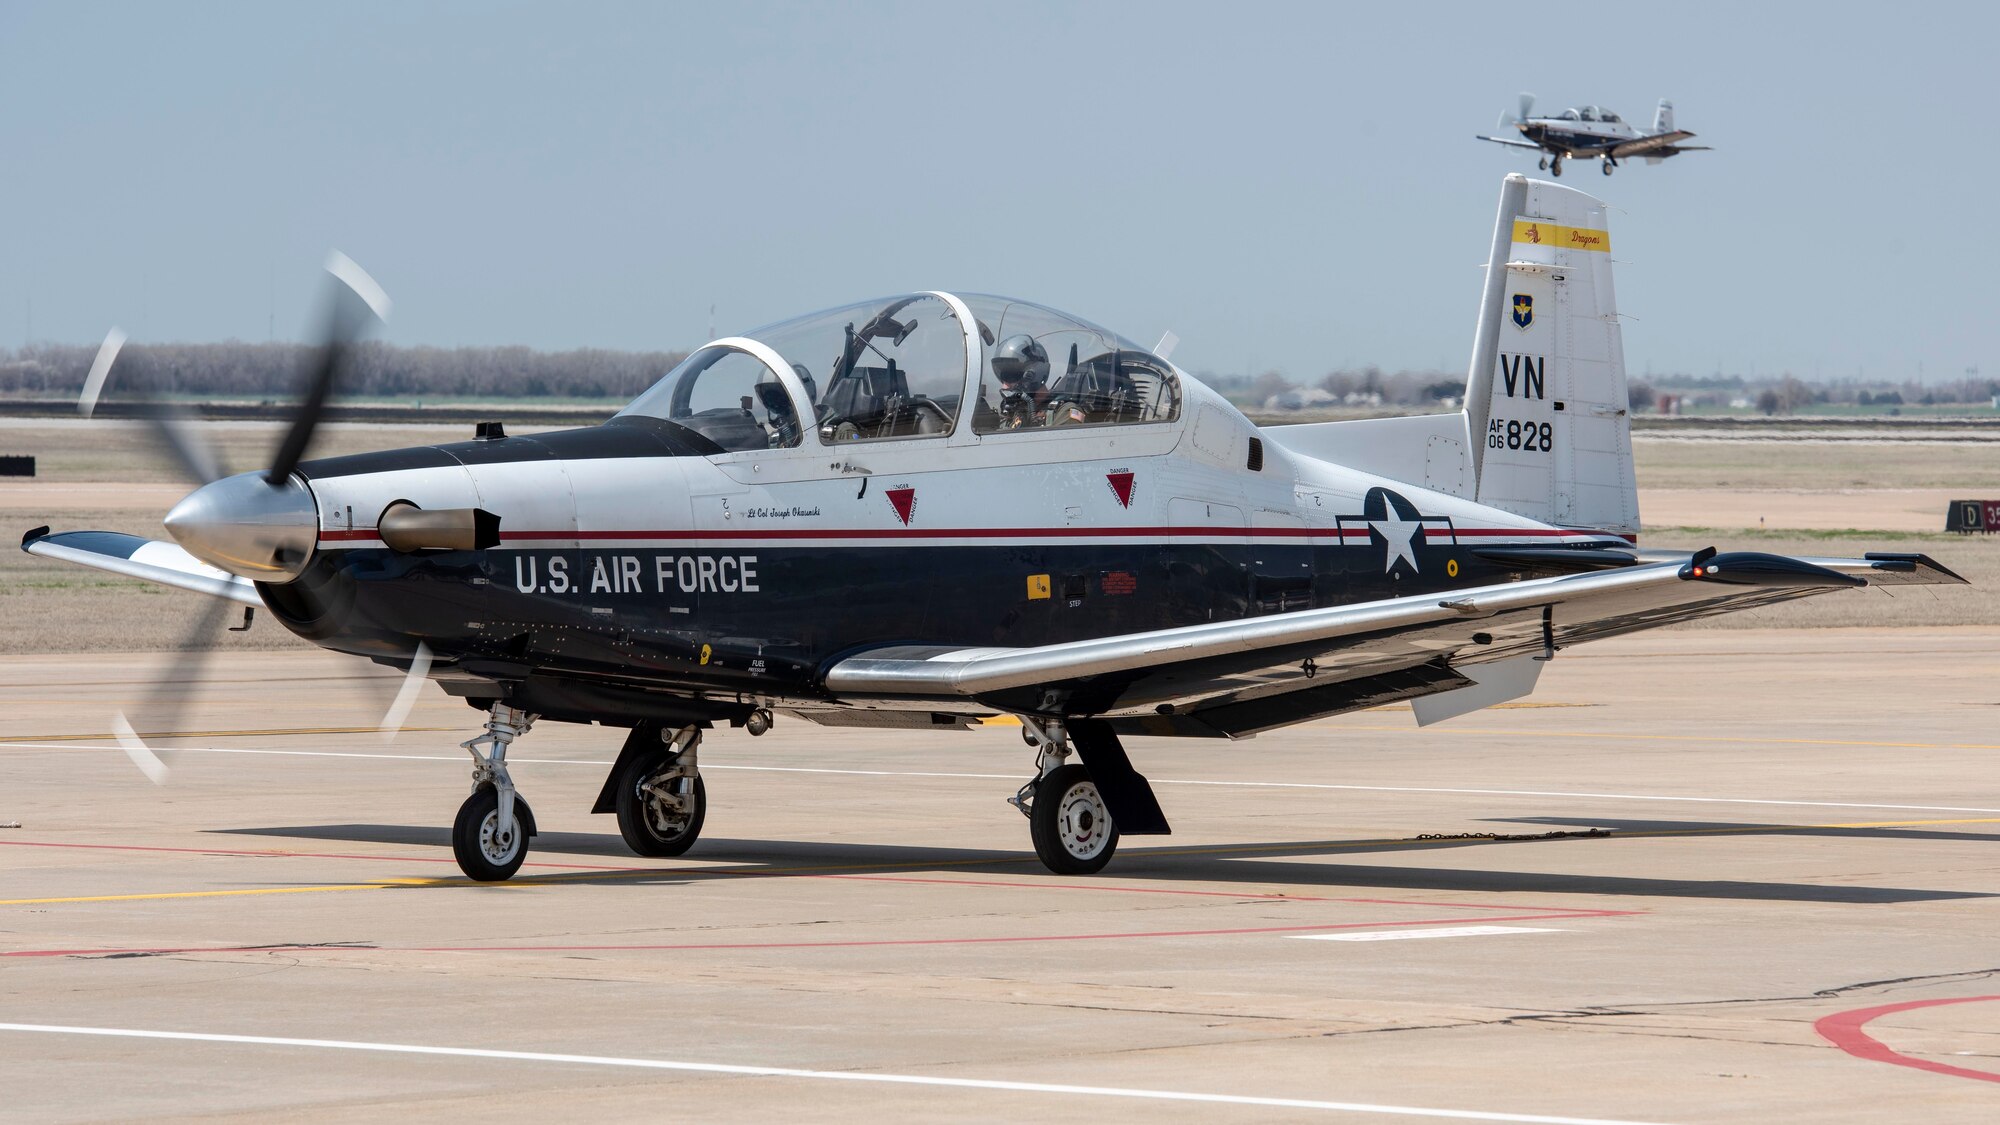 A T-6 Texan II takes off from the flightline at Vance Air Force Base on Mar. 27, 2019. The T-6A Texan II is a single-engine, two-seat primary trainer designed to train undergraduate pilot training students. (U.S. Air Force Photo by Airman 1st Class Octavius Thompson)